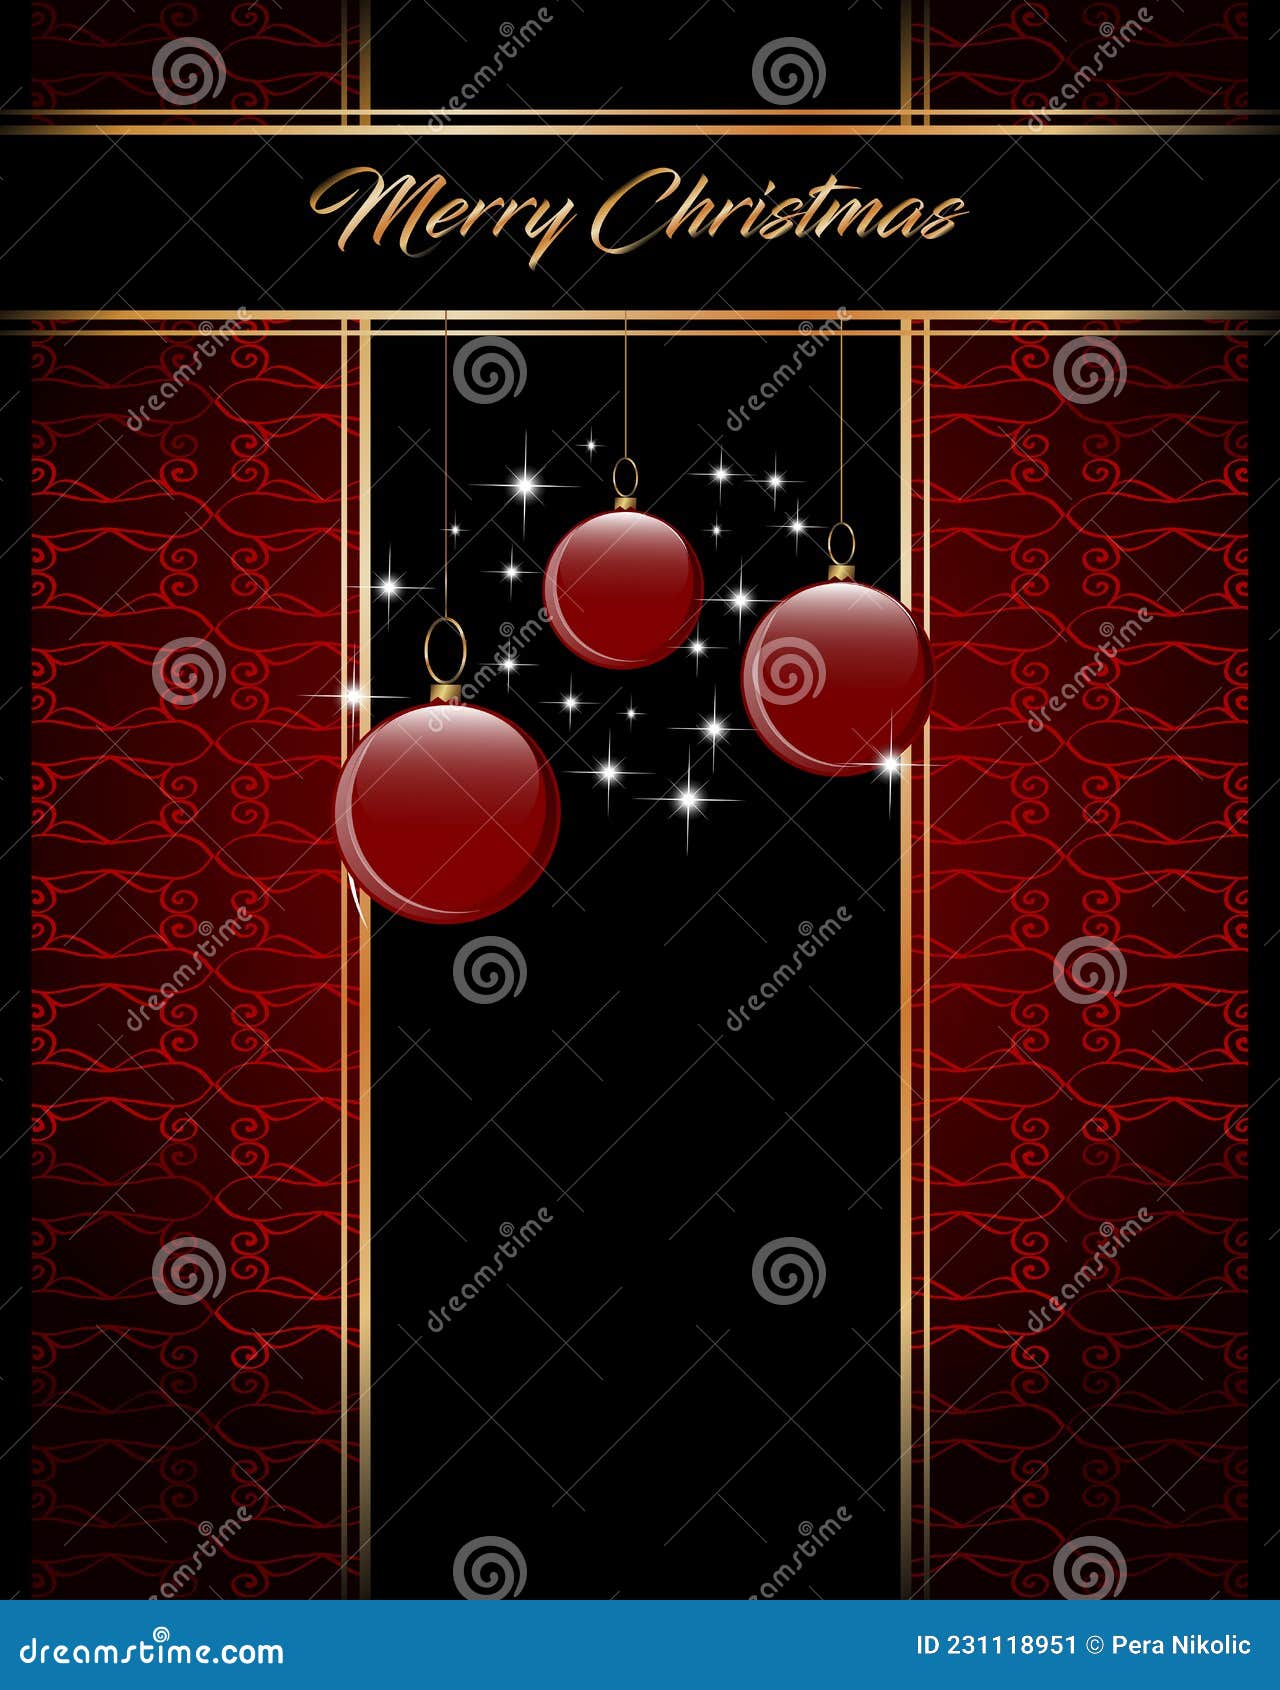 2022 Elegant Merry Christmas Background with Vintage Seamless Wallpaper.  Stock Vector - Illustration of present, background: 231118951